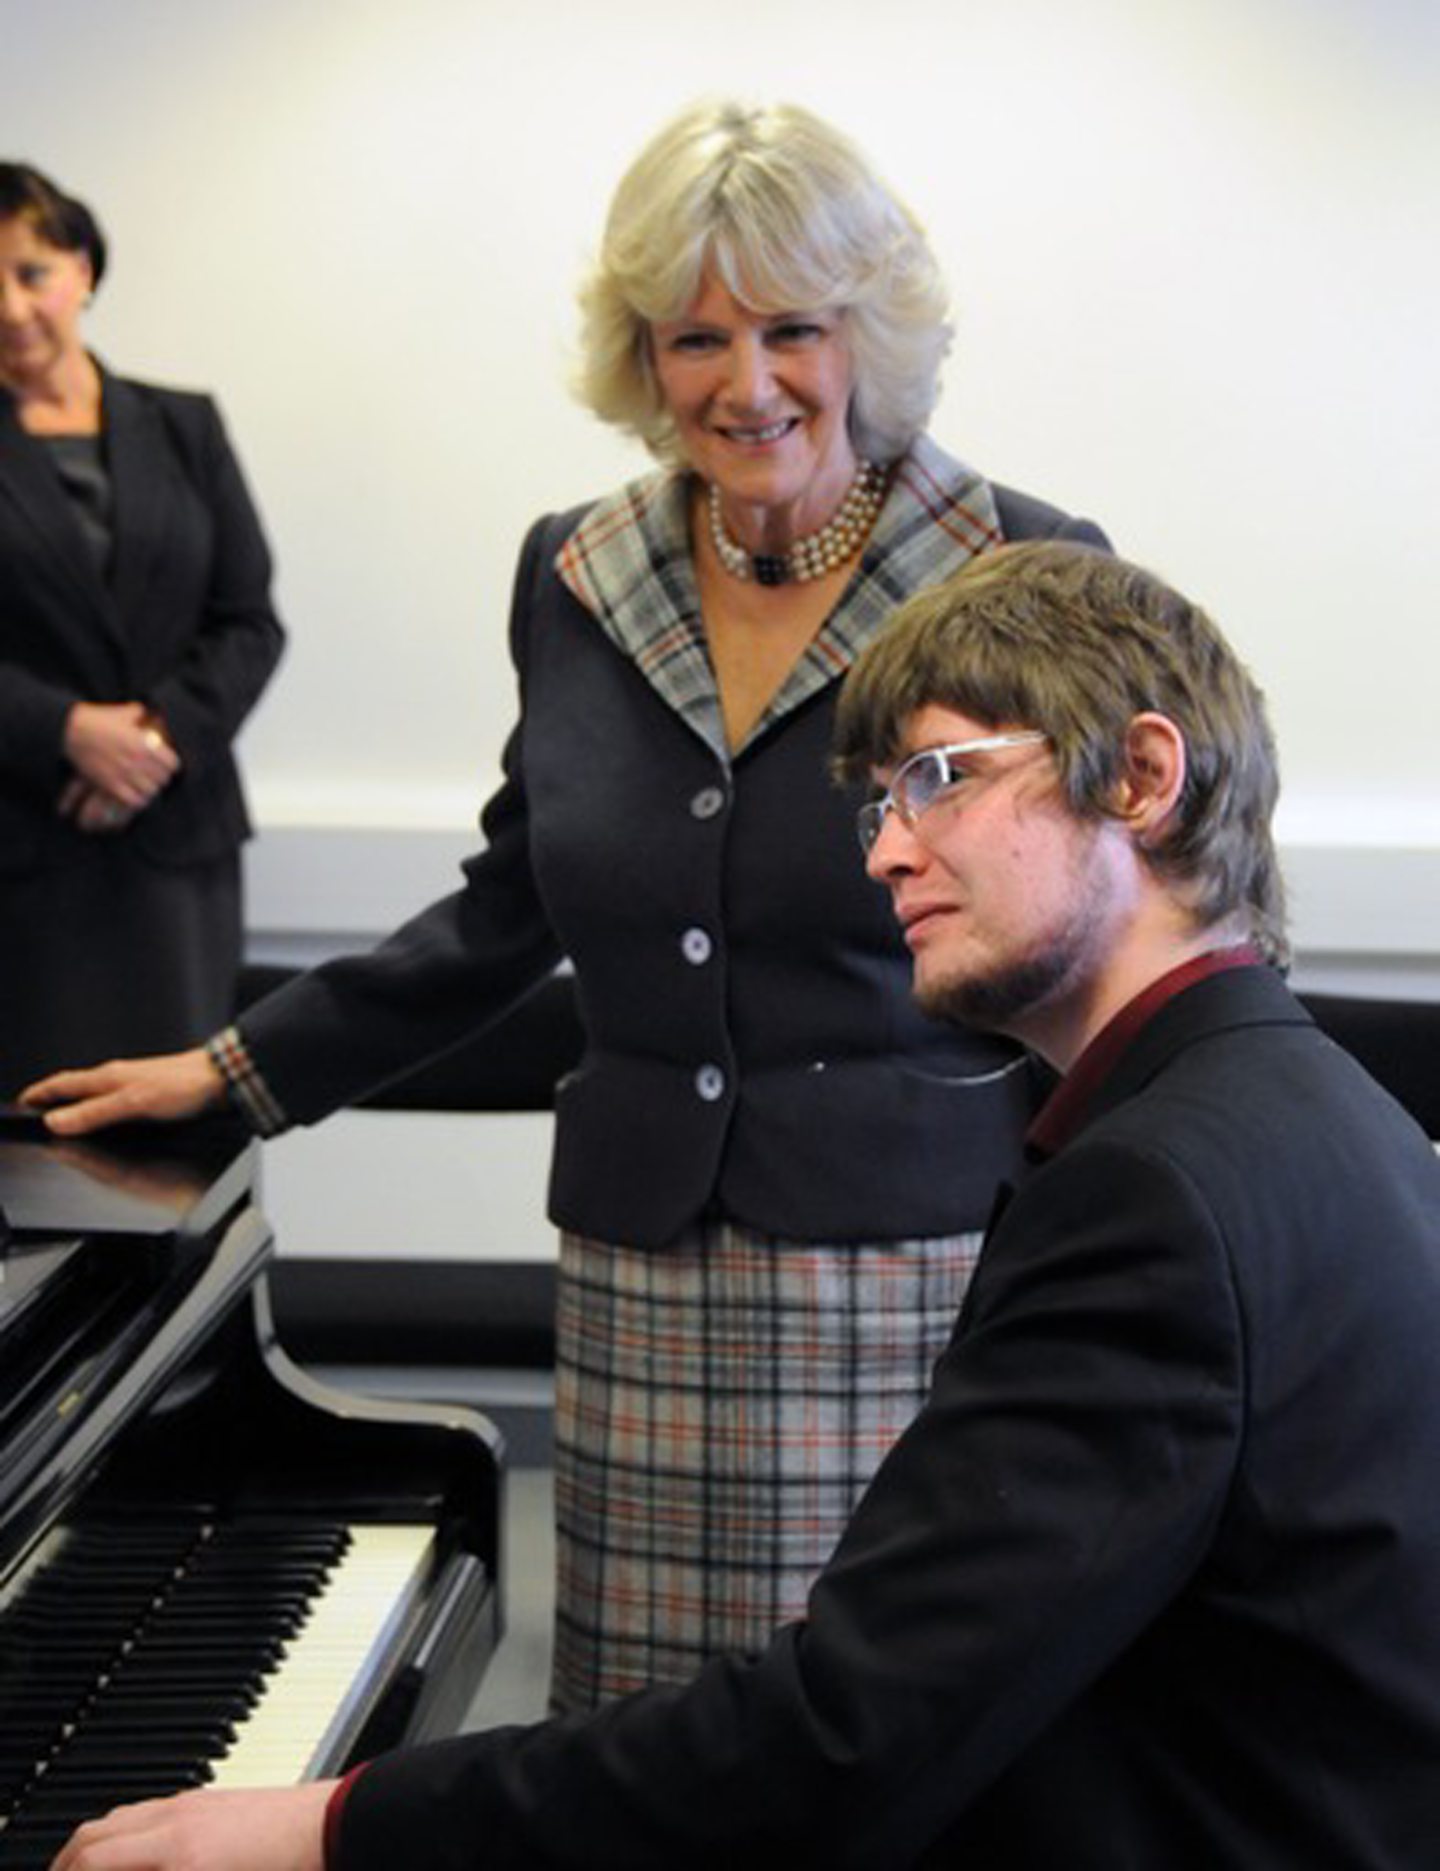 Paul Murray and the now Queen Camilla